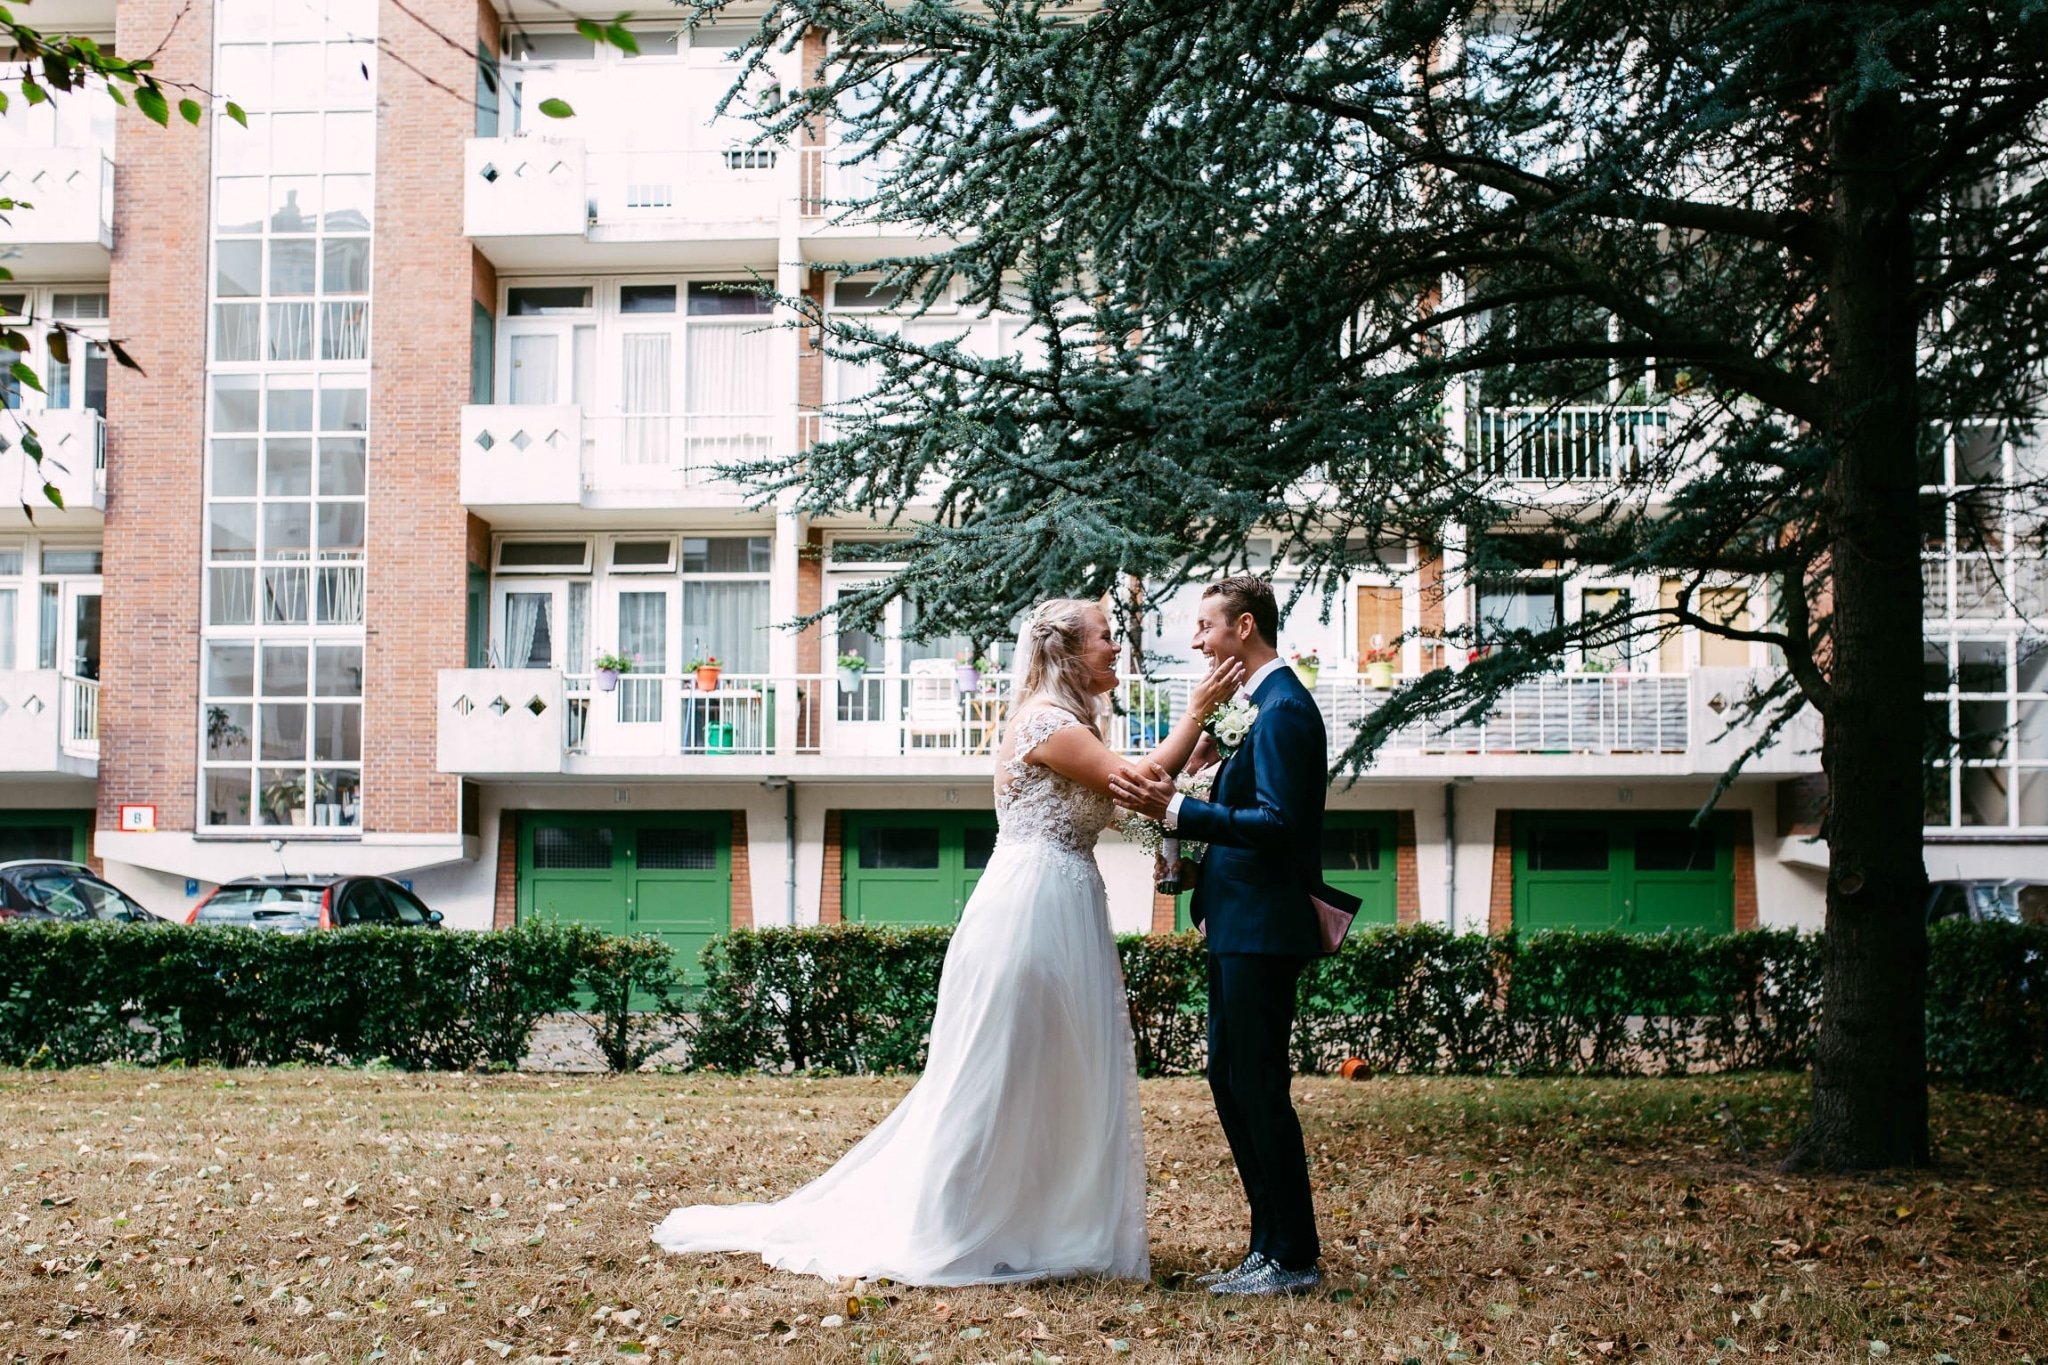 A bride and groom stand in front of an apartment complex.